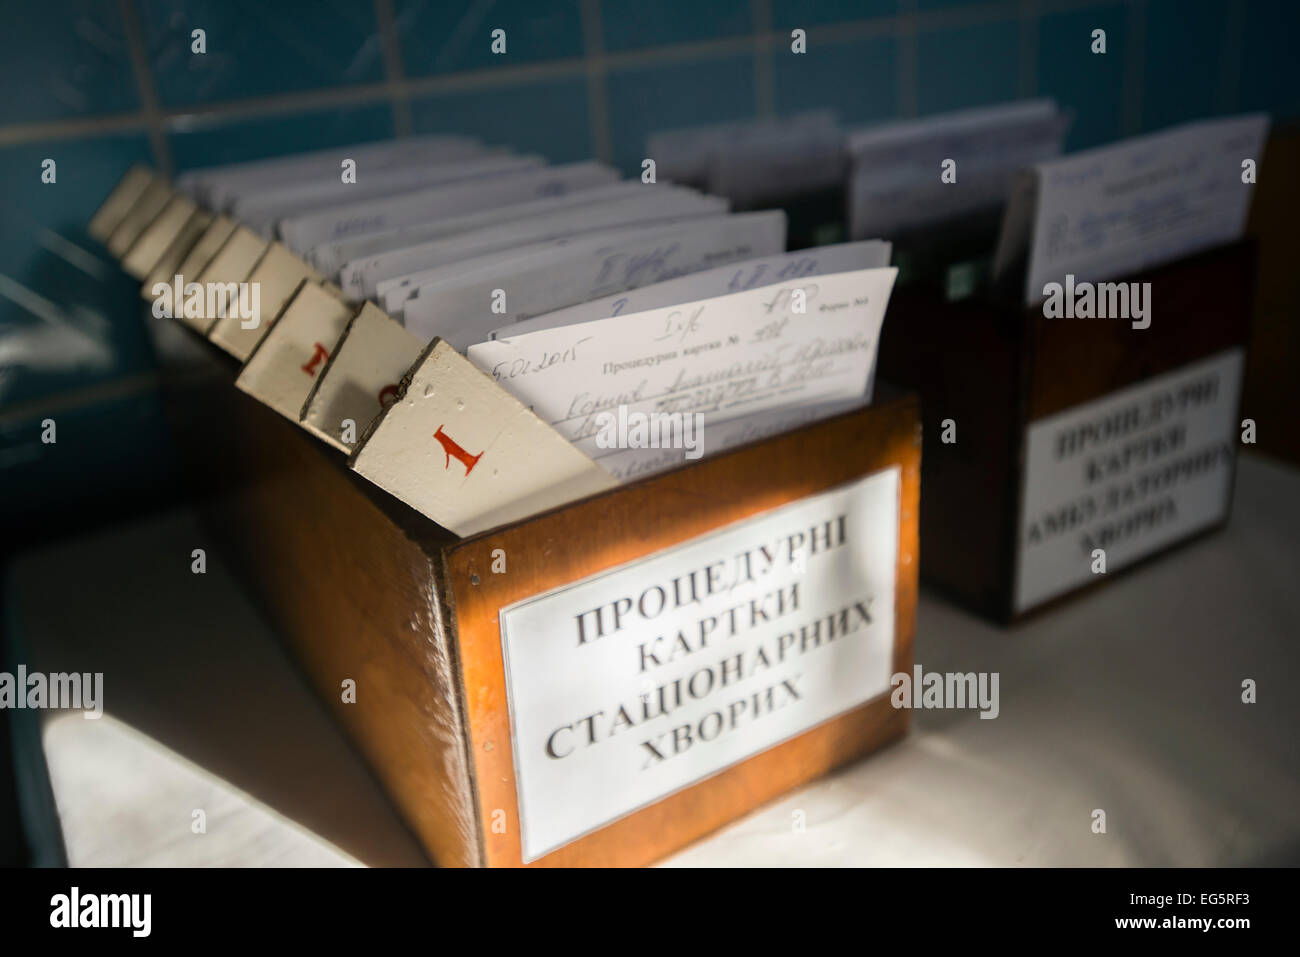 Patients cards in Military Hospital, Ukraine. During Ukrainian-Russian conflict military hospitals overloaded for more than 30%. Most of clinics work with old soviet medical equipment, and lack of modern machines such as tomographs. 16 of February. Photo by Oleksandr Rupeta Stock Photo